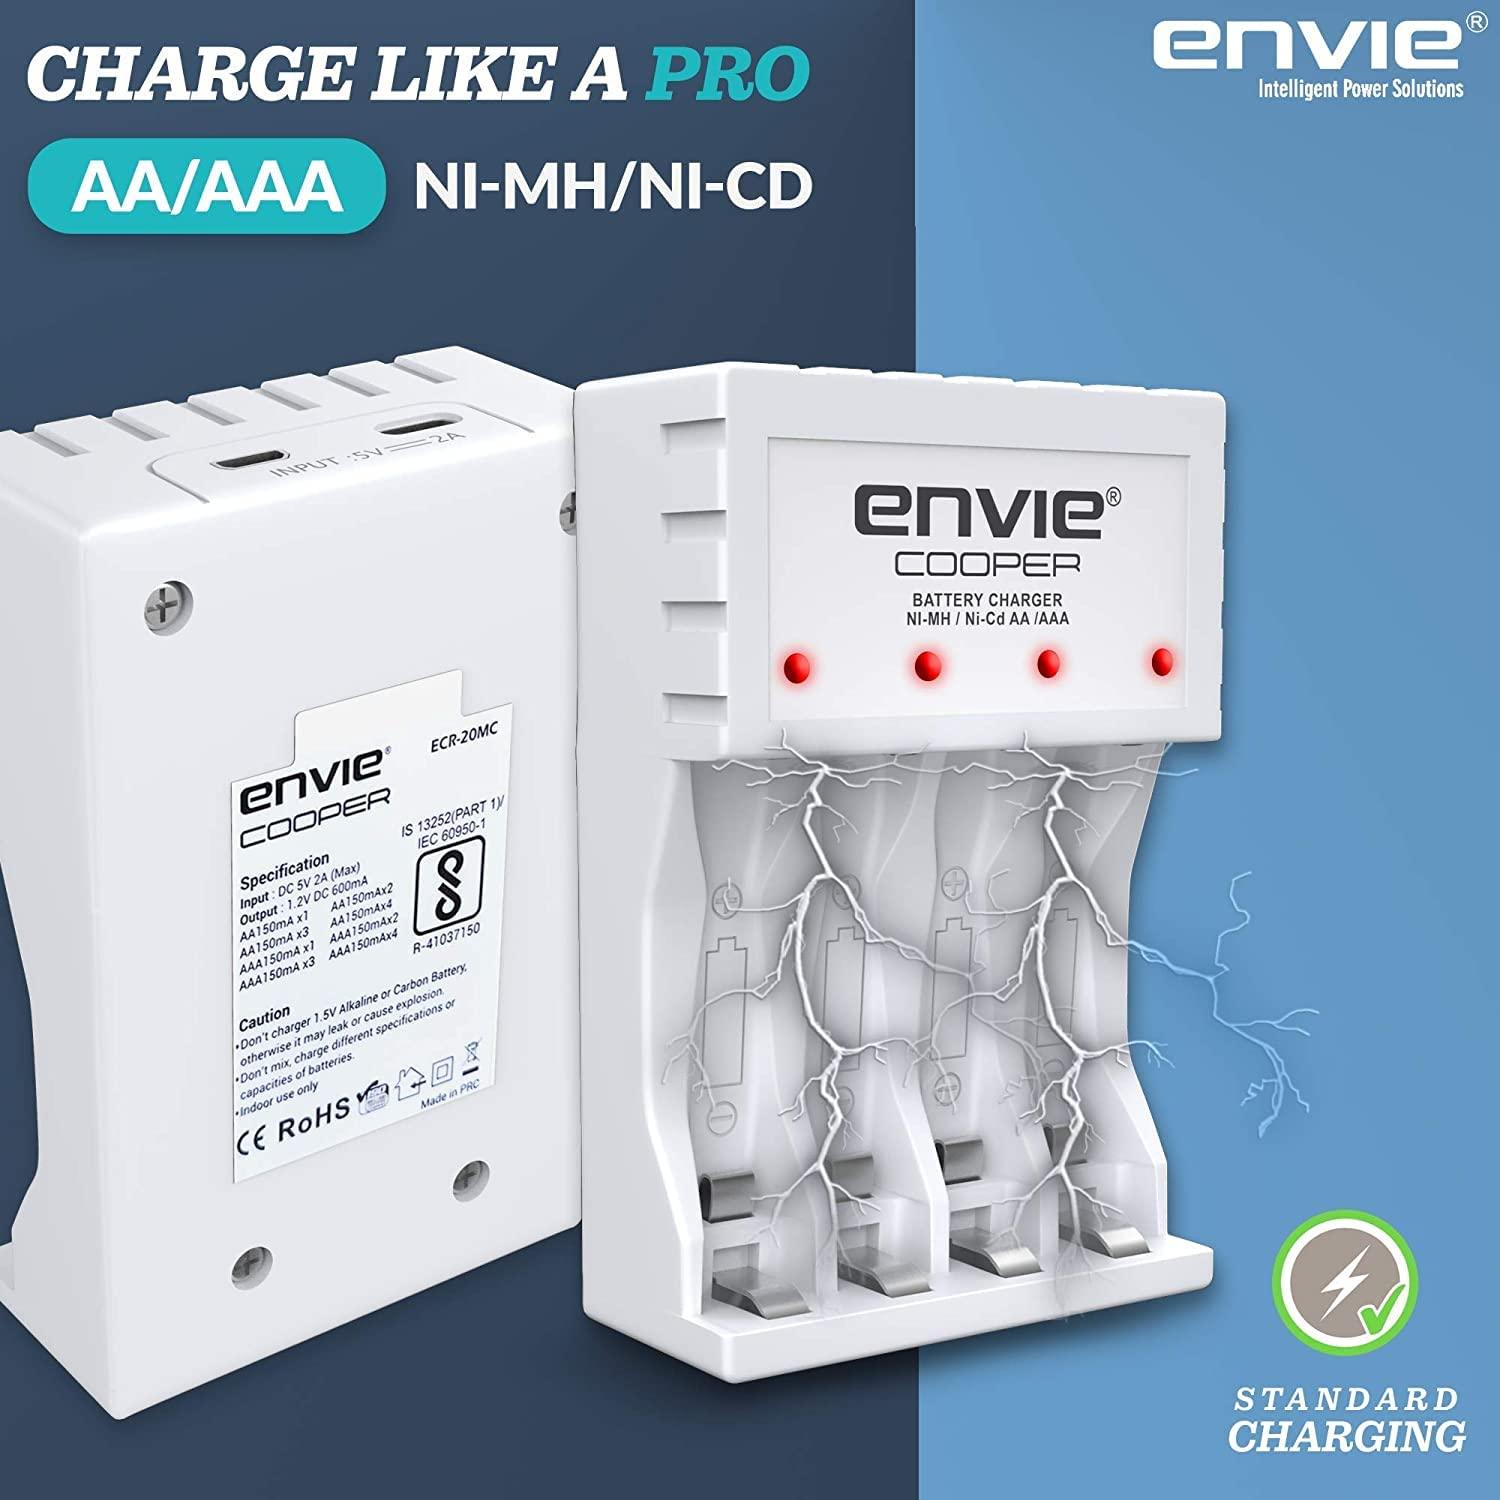 ENVIE (ECR 20MC+2800+1100) Standard Charger ECR 20 MC for AA & AAA Ni-mh/Ni-Cd Rechargeable Batteries | LED Indicator | 600MA Output Current | with 2xAA2800 & 2xAAA1100 Rechargeable Batteries - Digitek